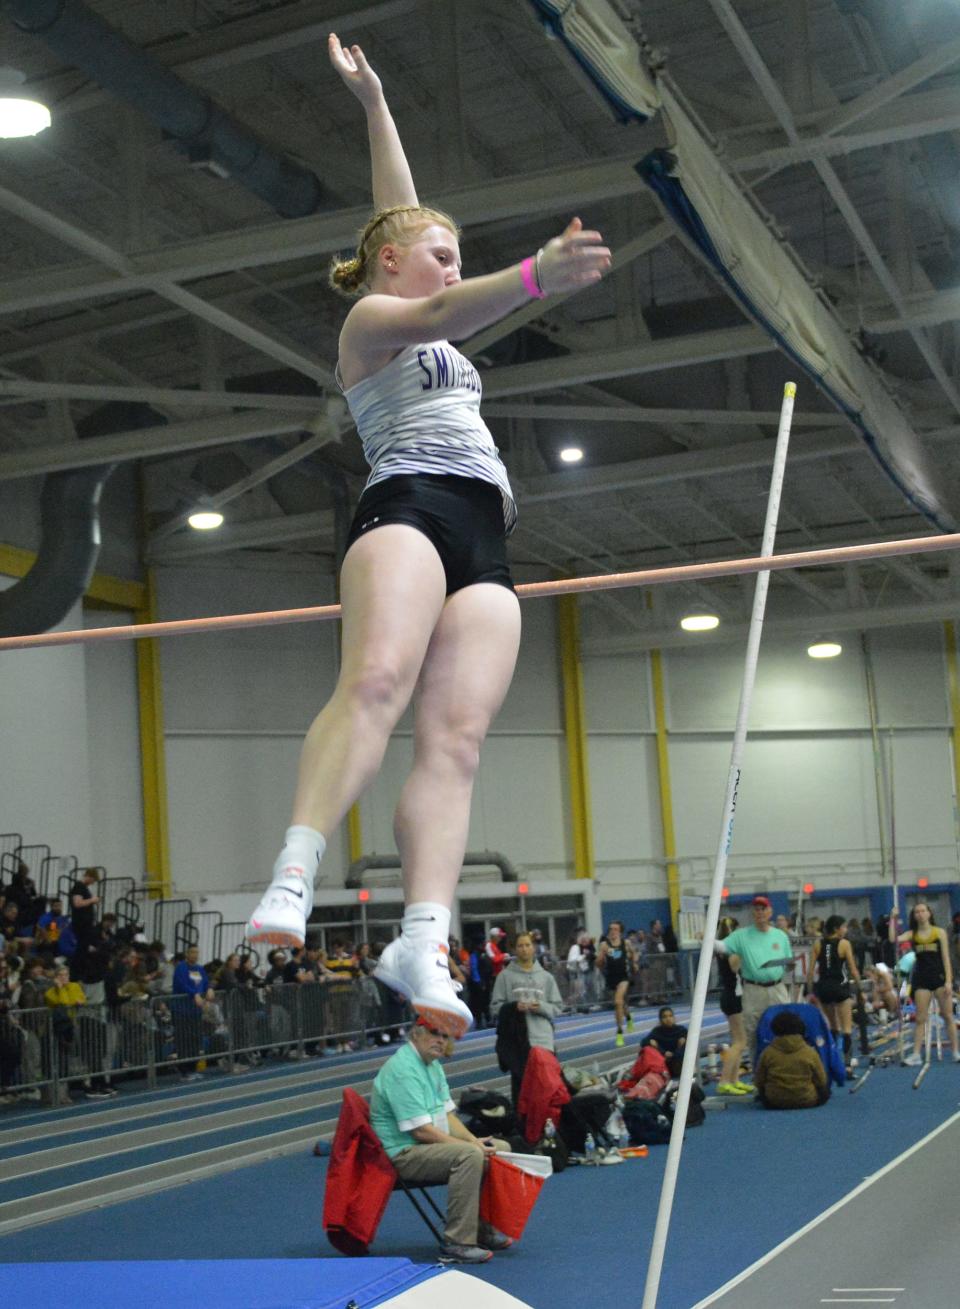 Smithsburg's Alexandria Spithaler won the girls pole vault, clearing 9 feet, 3 inches.